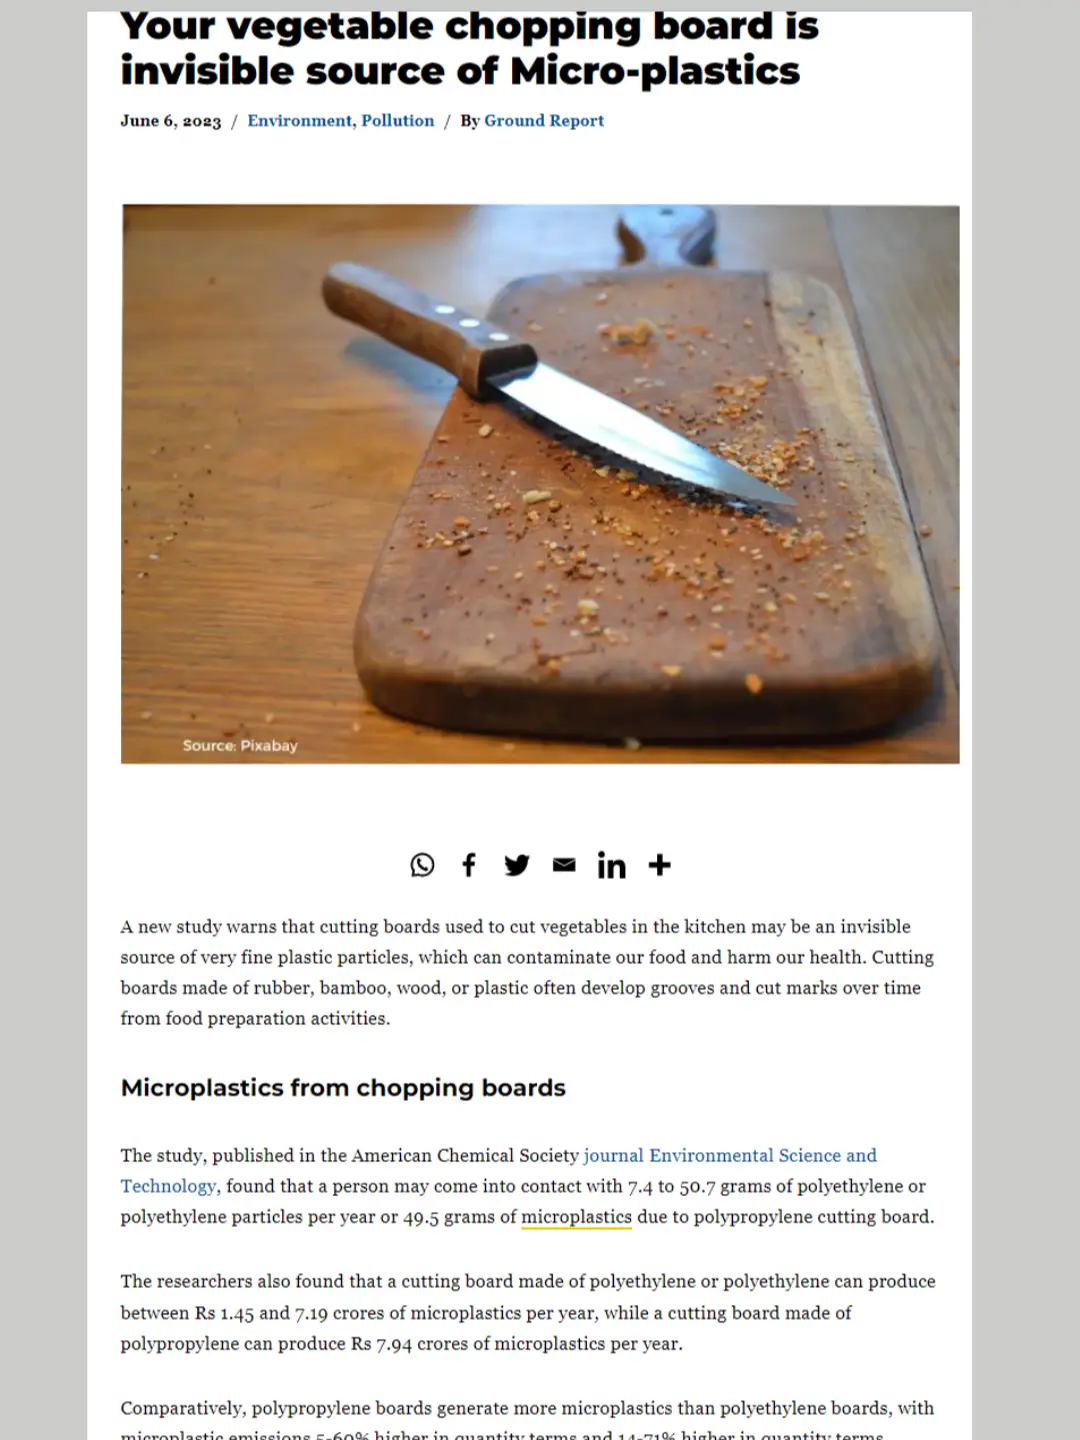 Cutting Boards: An Overlooked Source of Microplastics in Human Food?